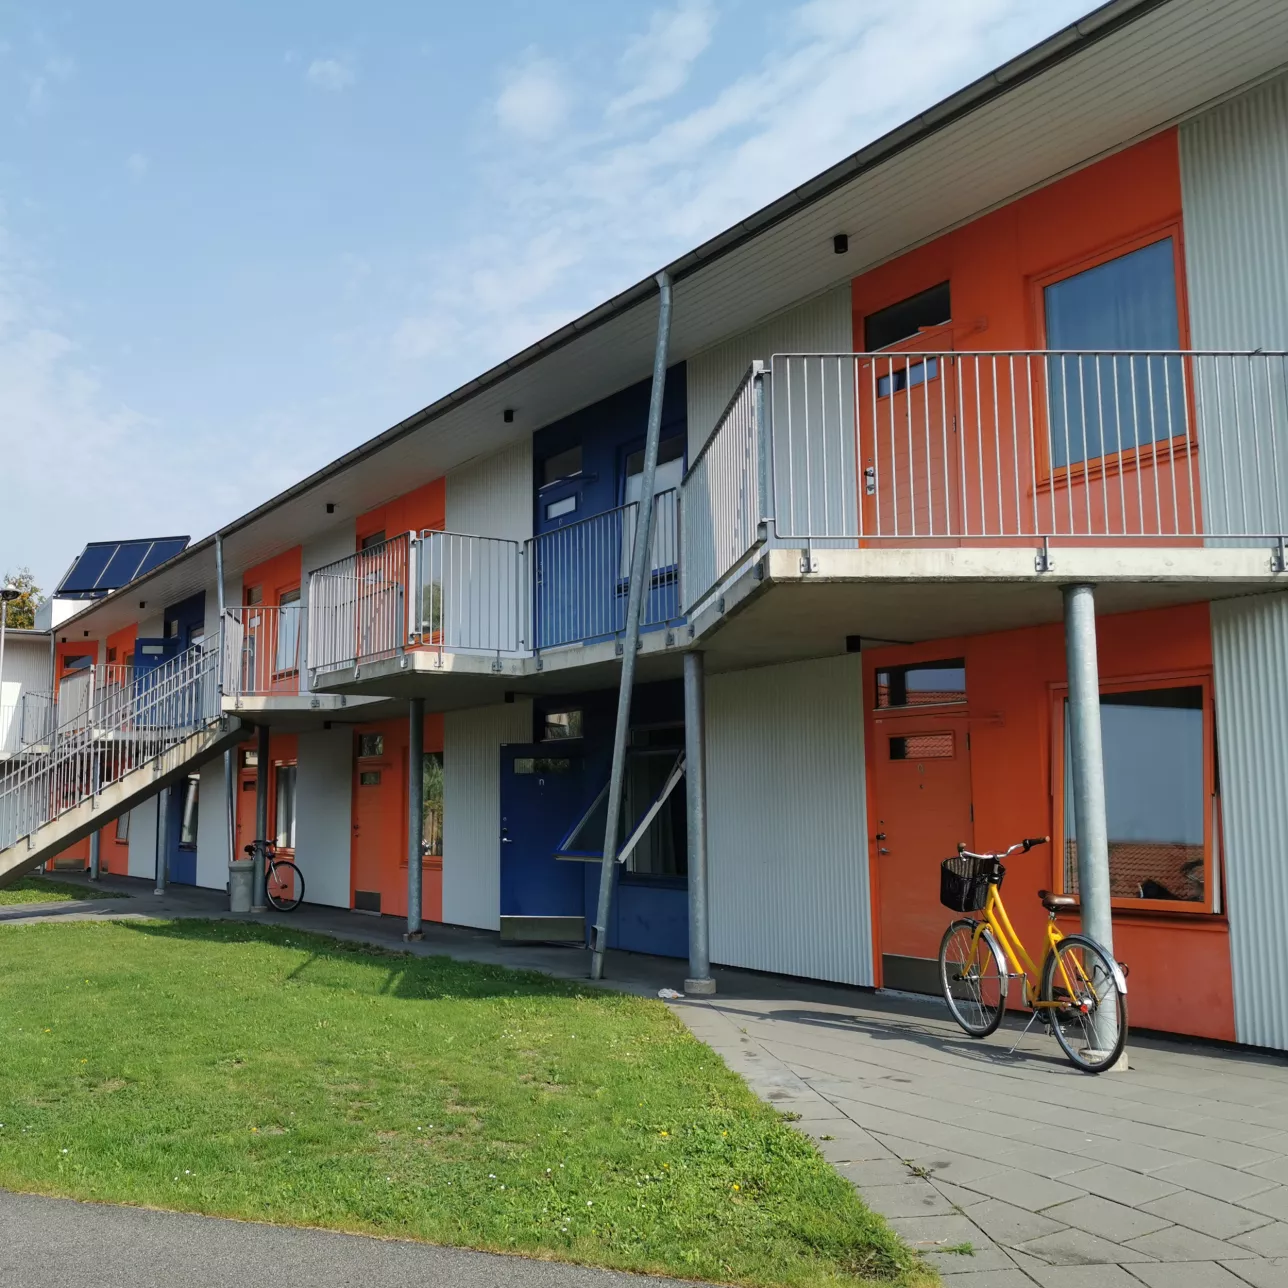 A white two-story building with a raised walkway, and doors painted alternating bright blue and orange. Photo by LU Accommodation.